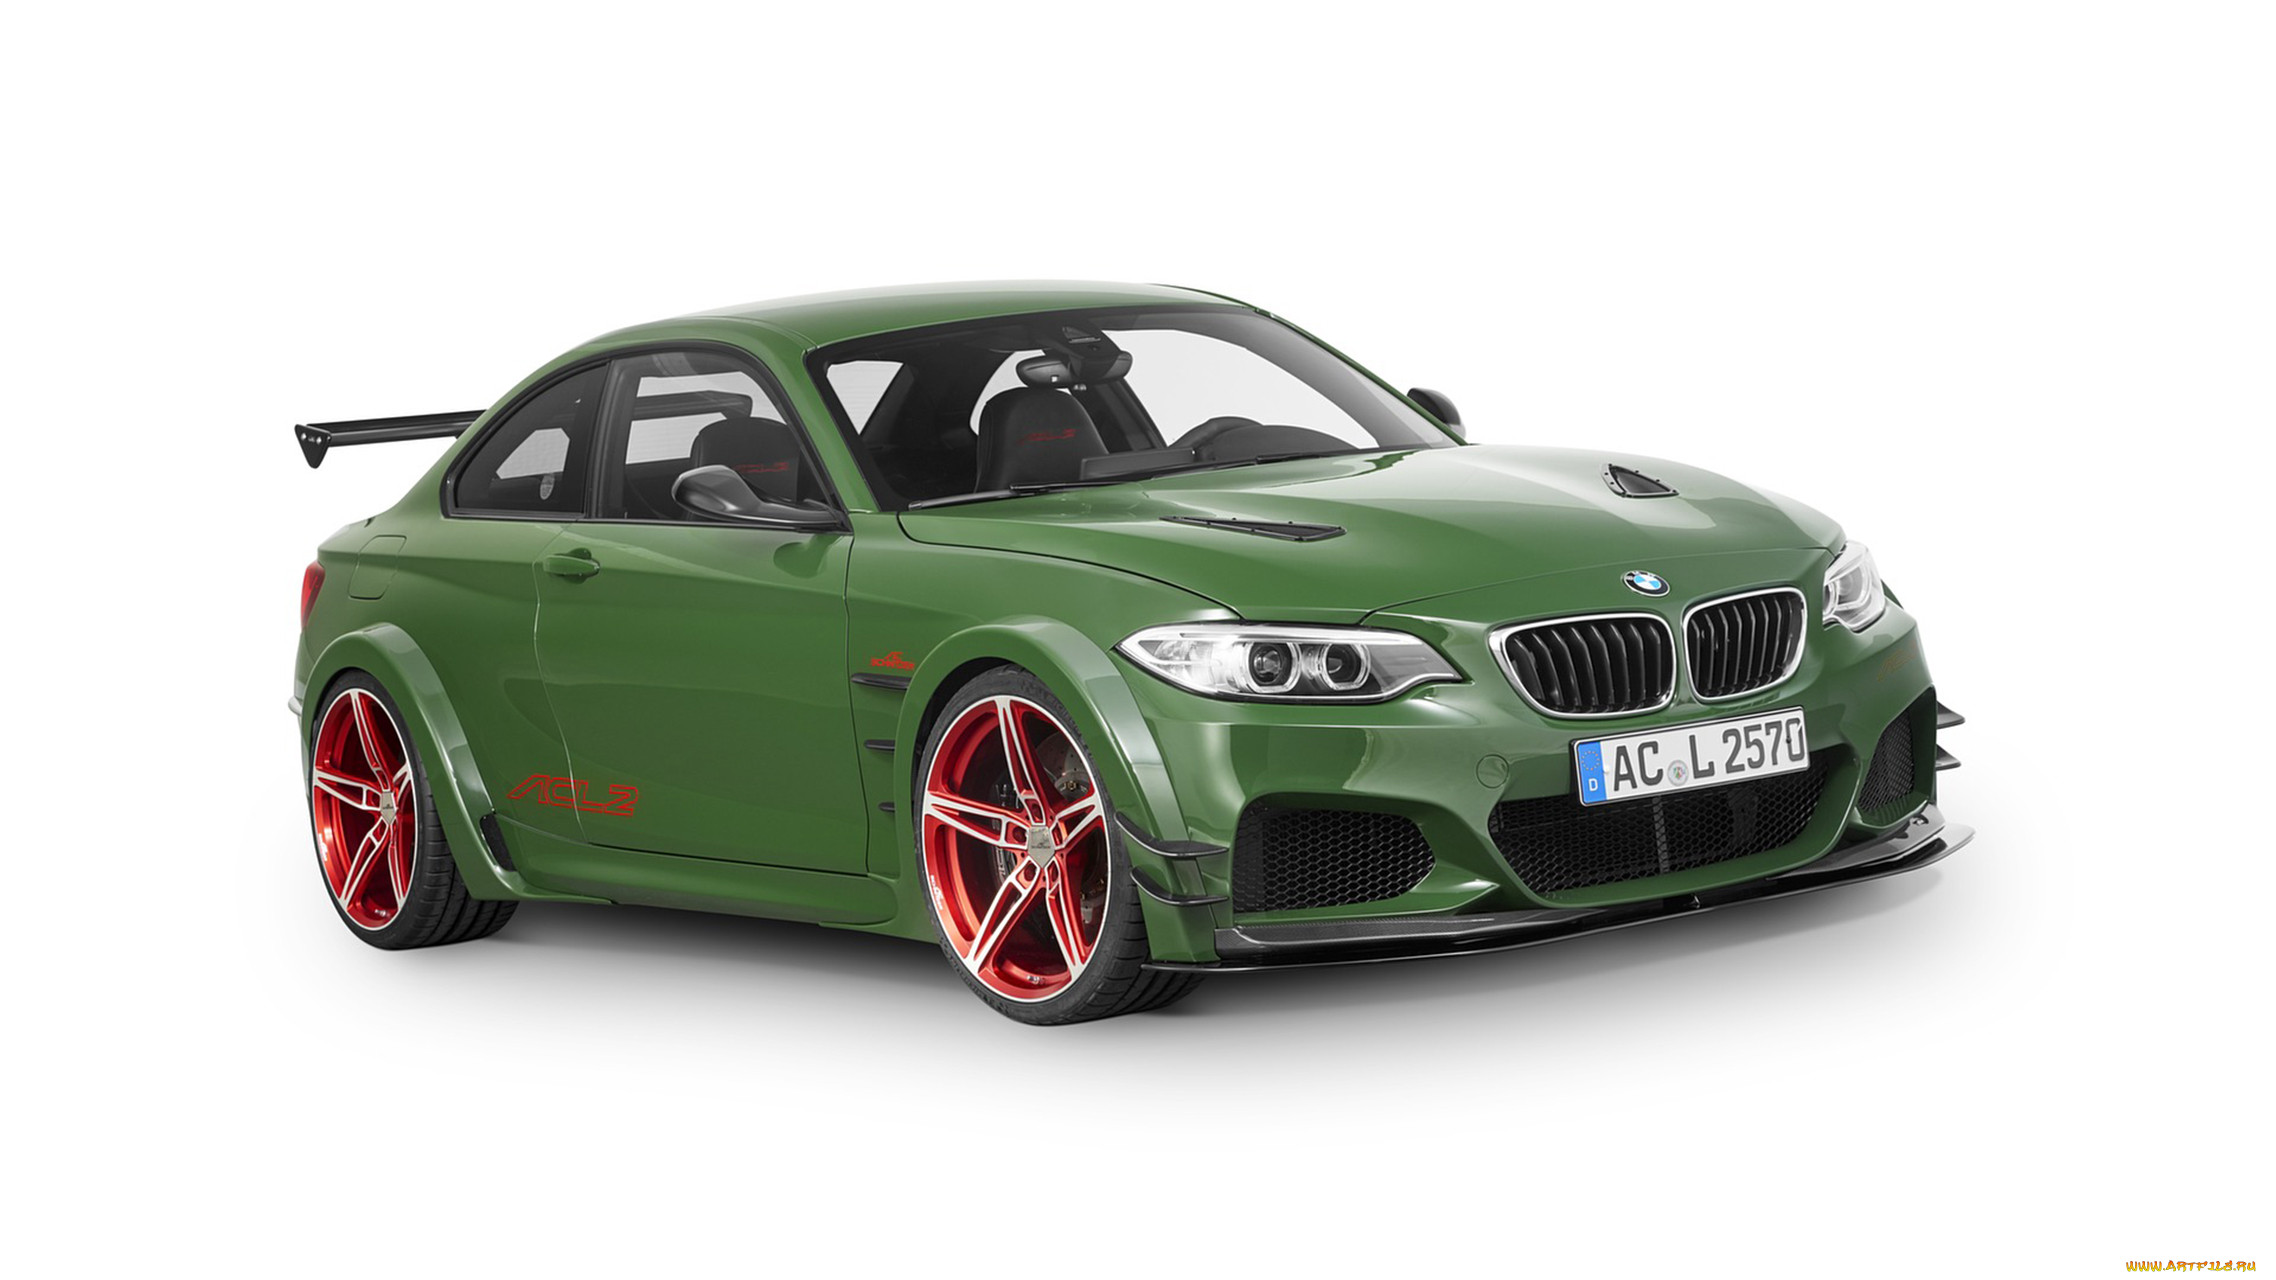 ac schnitzer acl2 concept based on the bmw m-235i coupe 2016, , bmw, 2016, m-235i, coupe, acl2, ac, schnitzer, based, concept